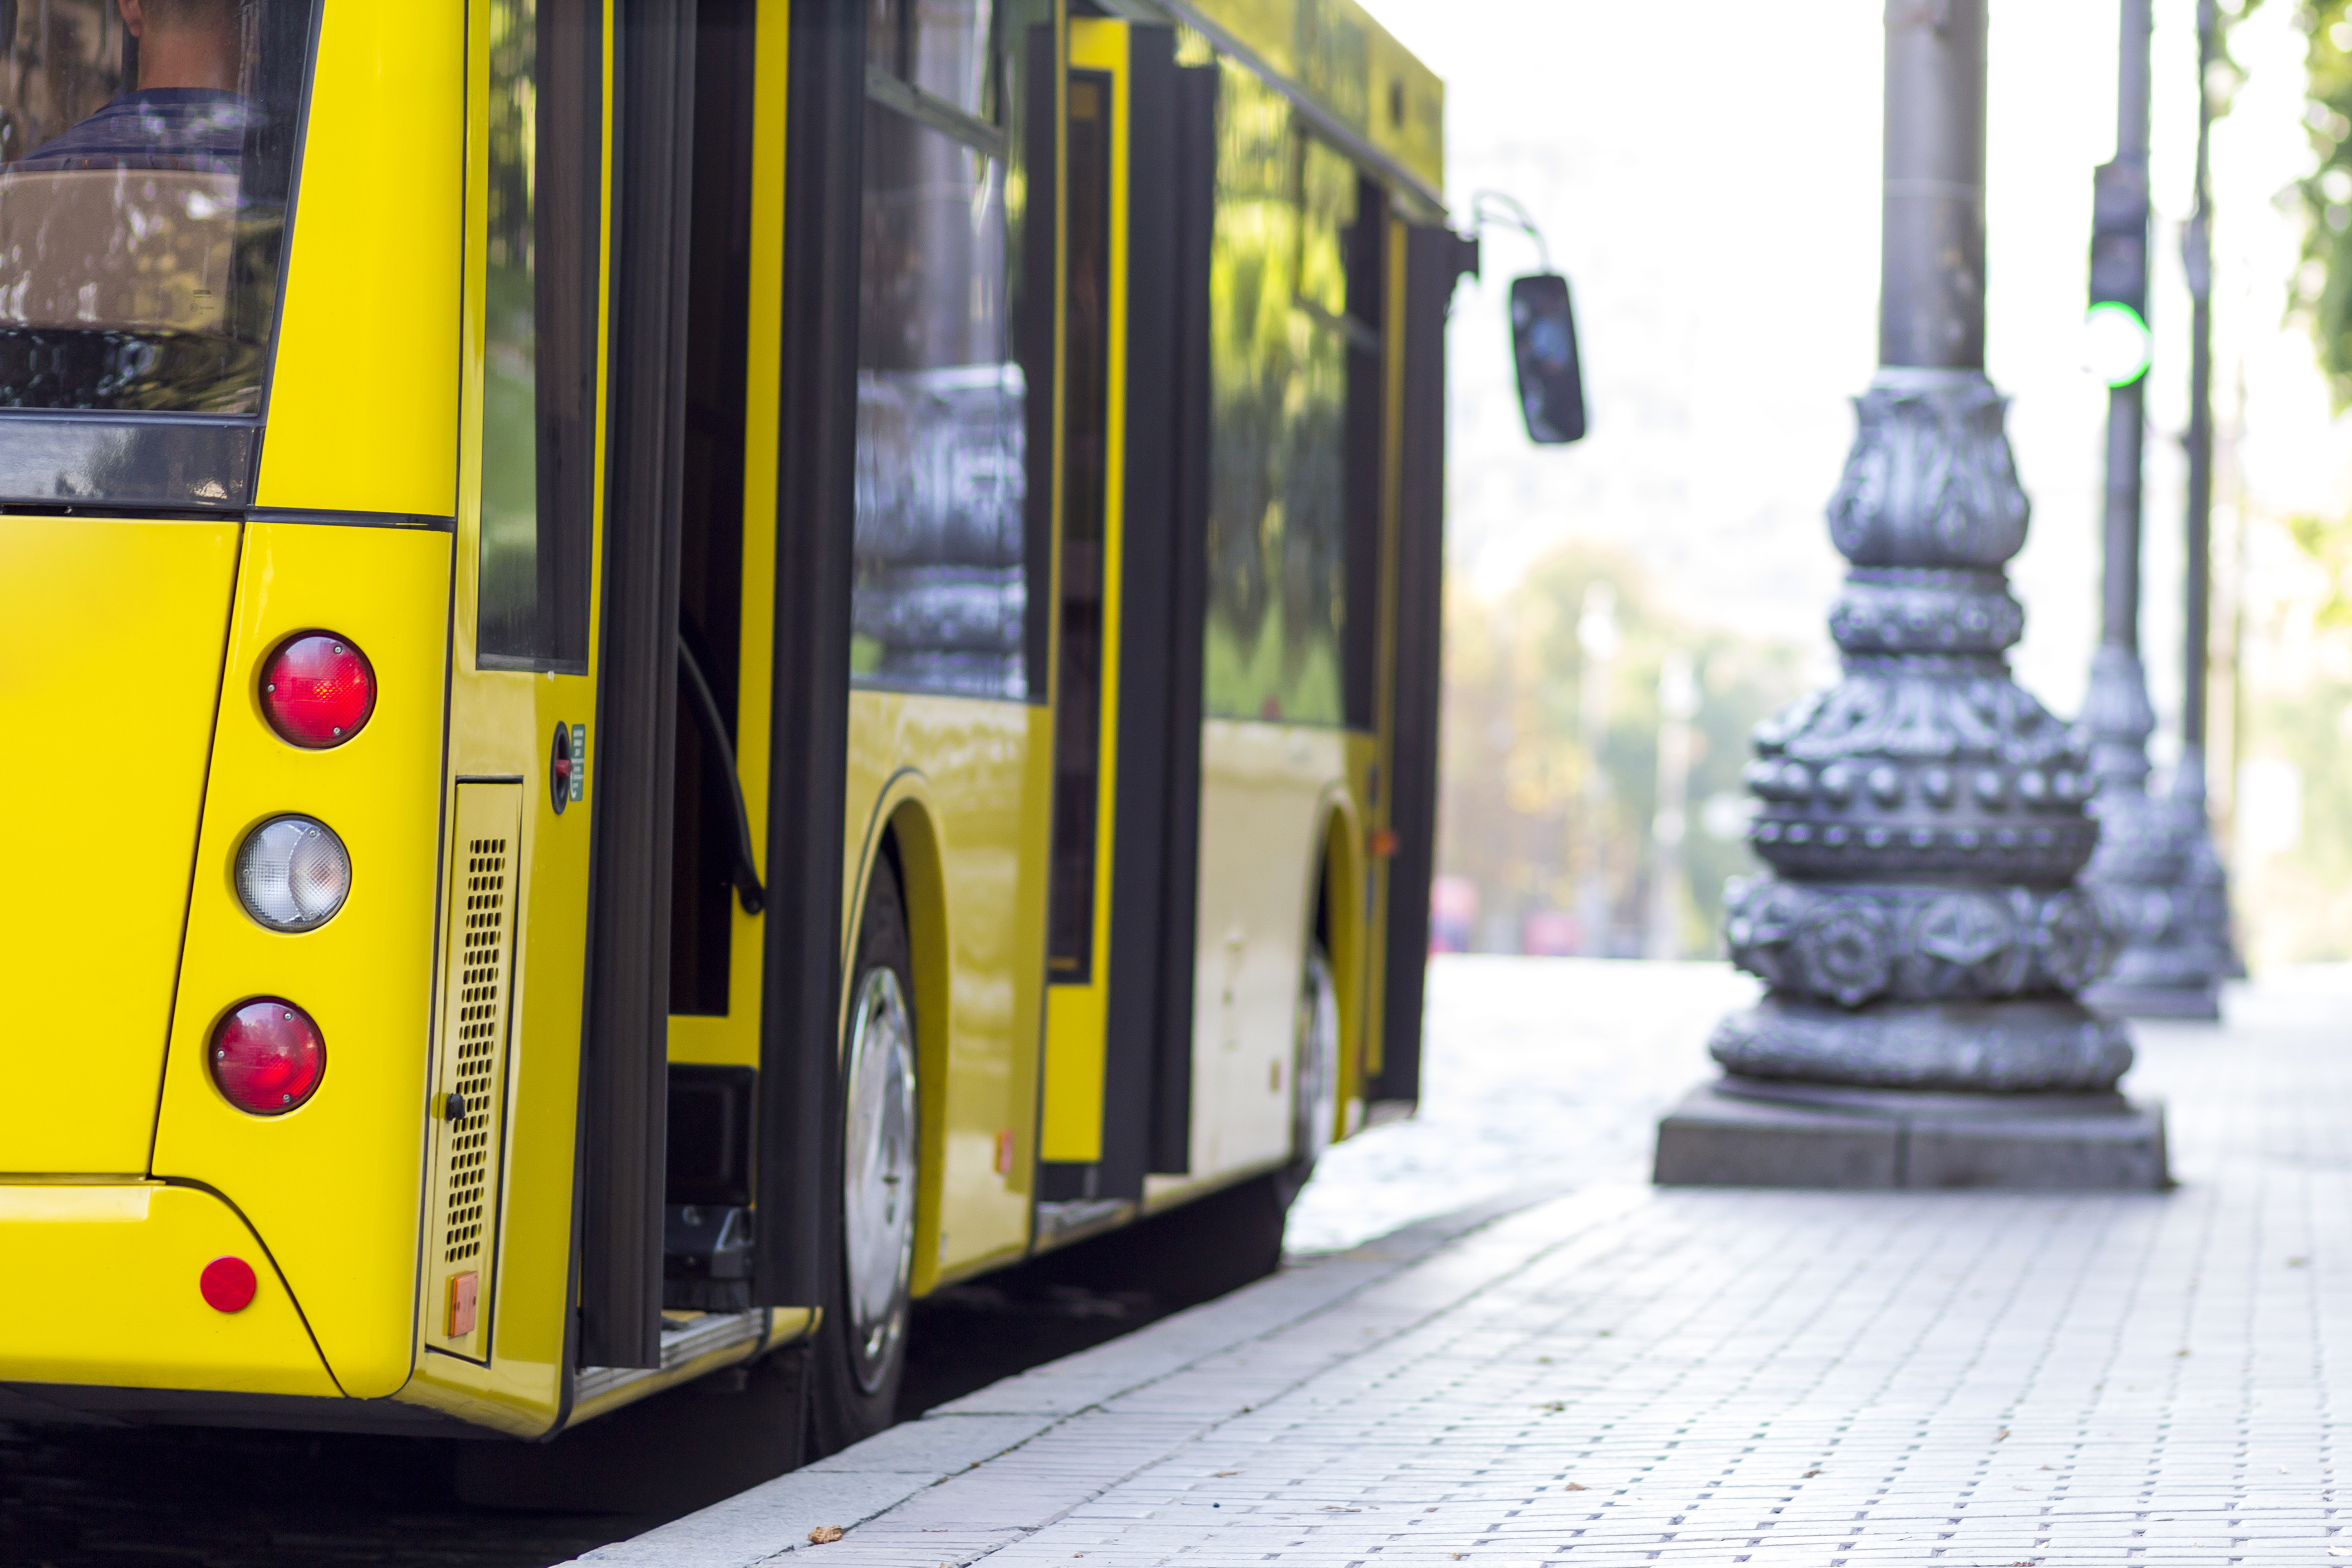 Using Audio Alerts to Prevent Unsecured Bus Accidents